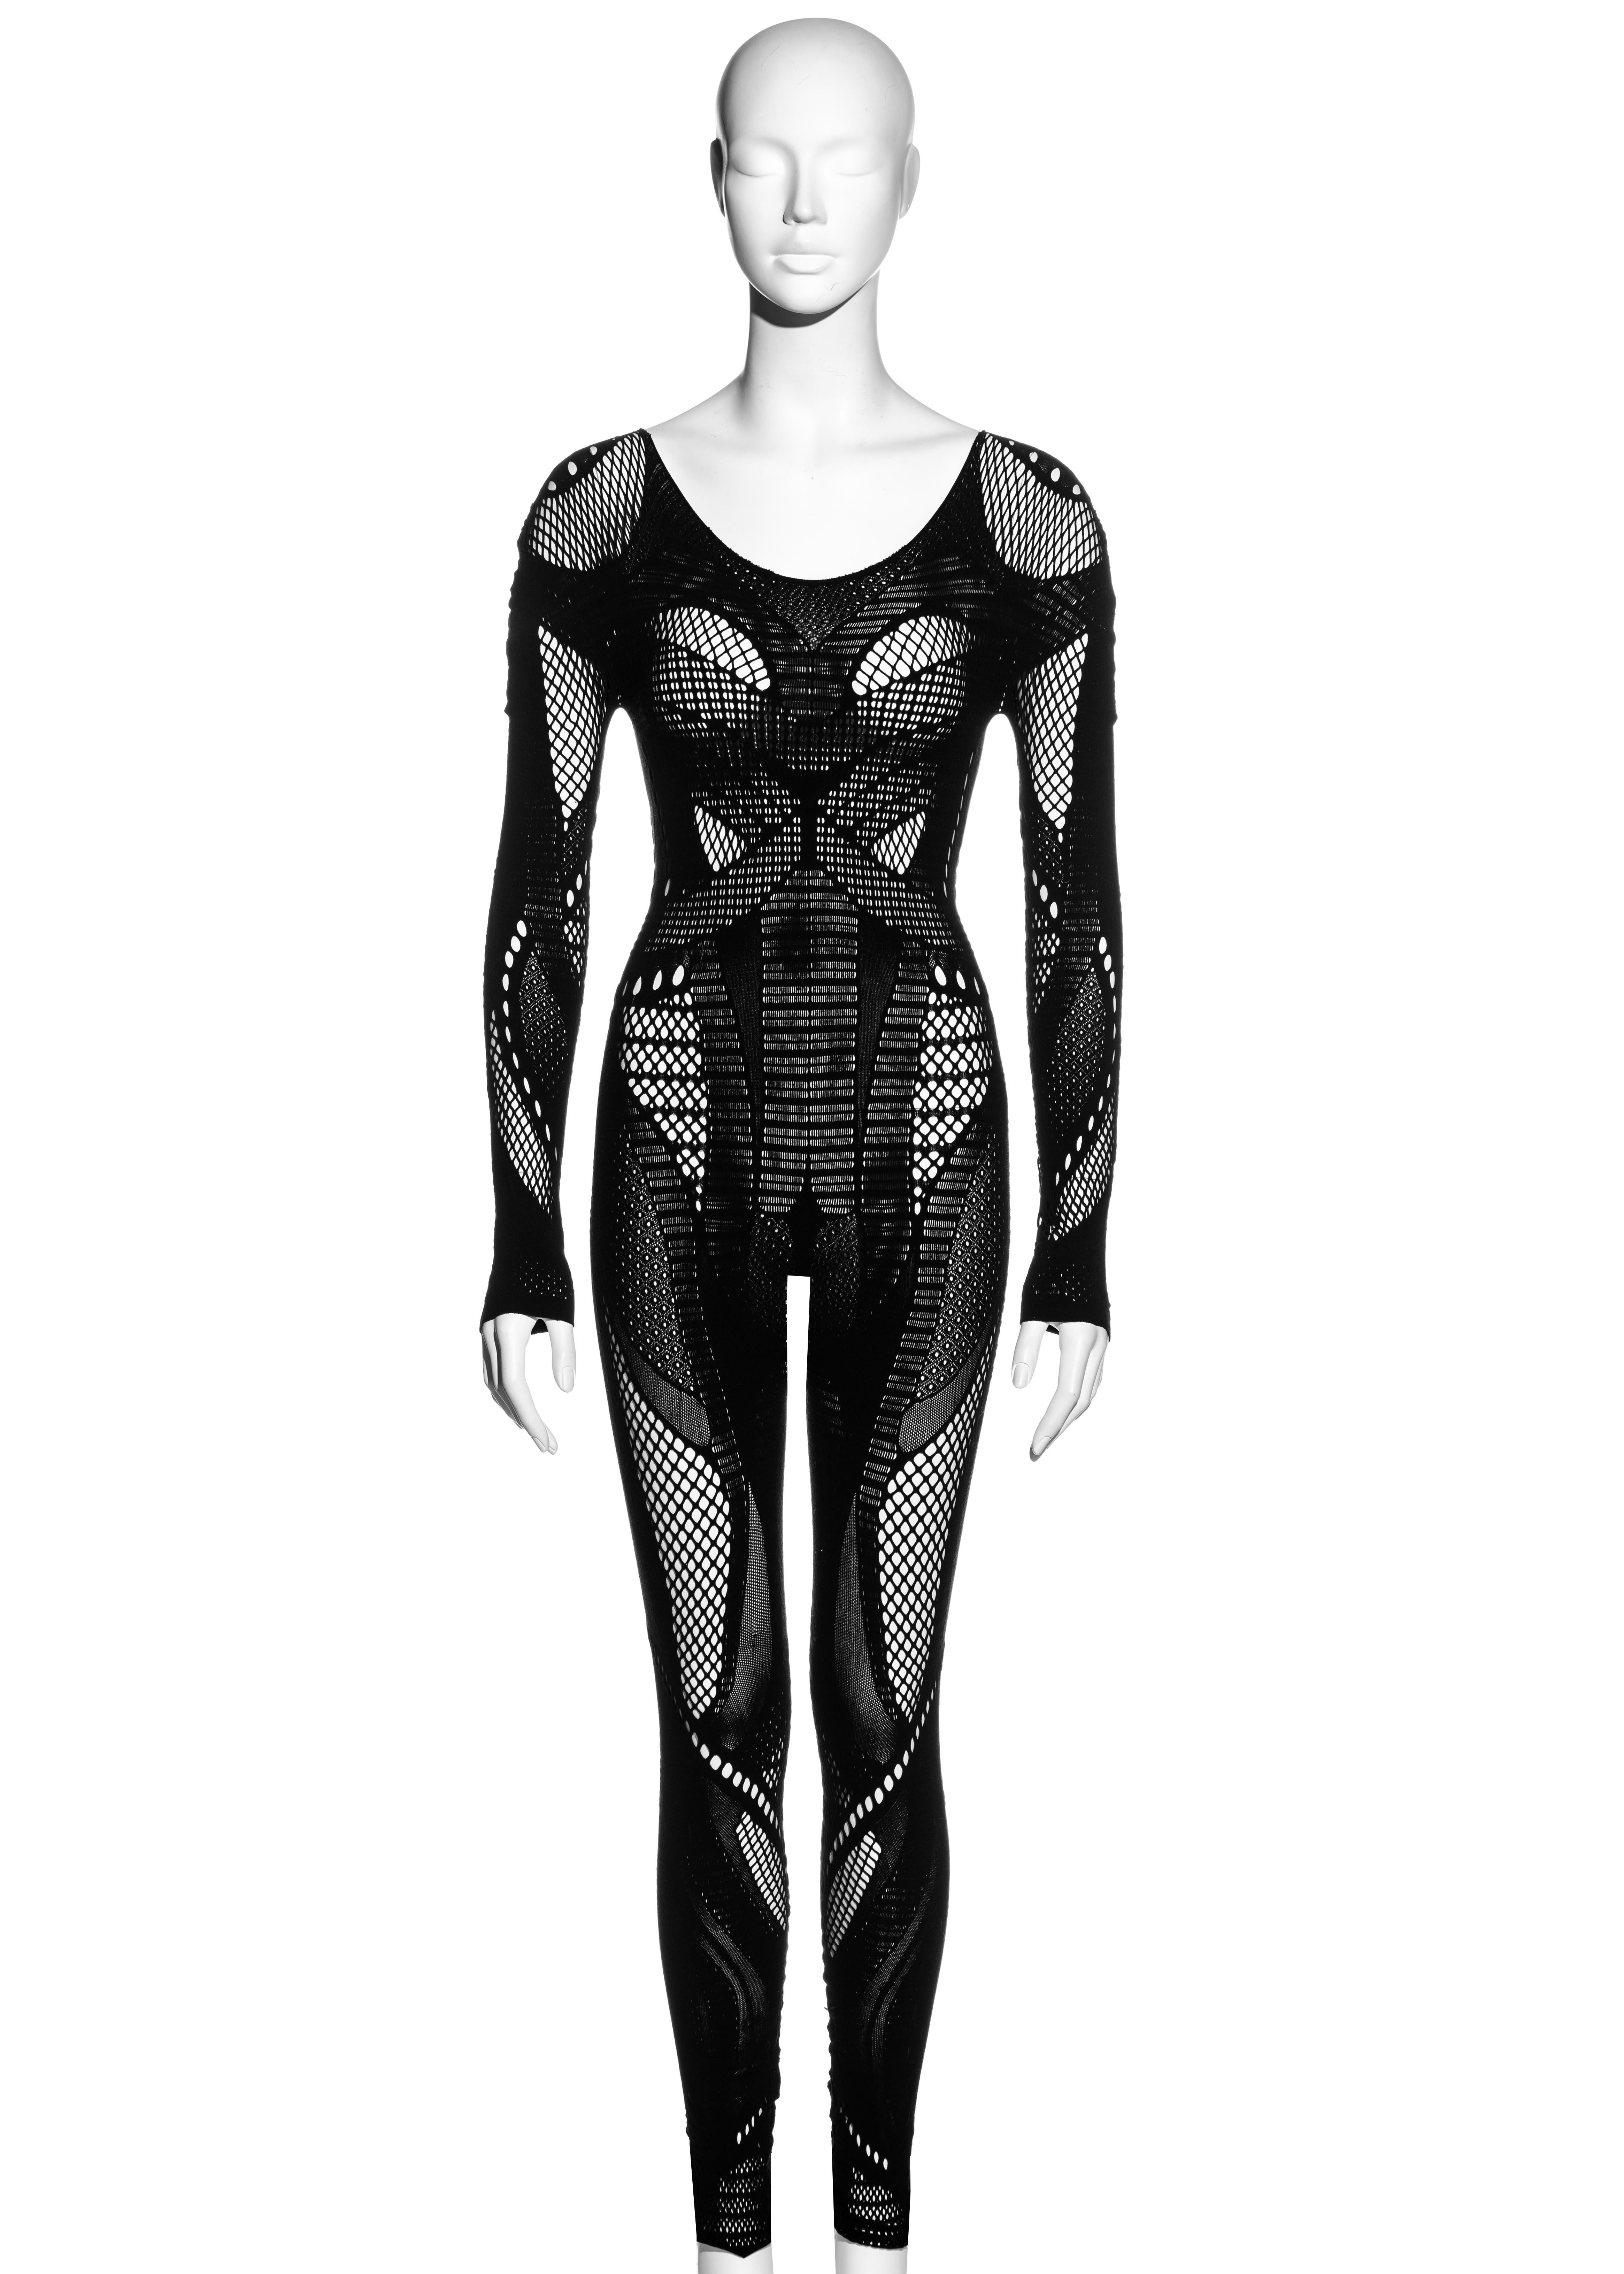 ▪ McQ by Alexander McQueen black mesh bodystocking 
▪ Scoop neck
▪ Skin baring cutouts 
▪ Size Small
▪ Fall-Winter 2011